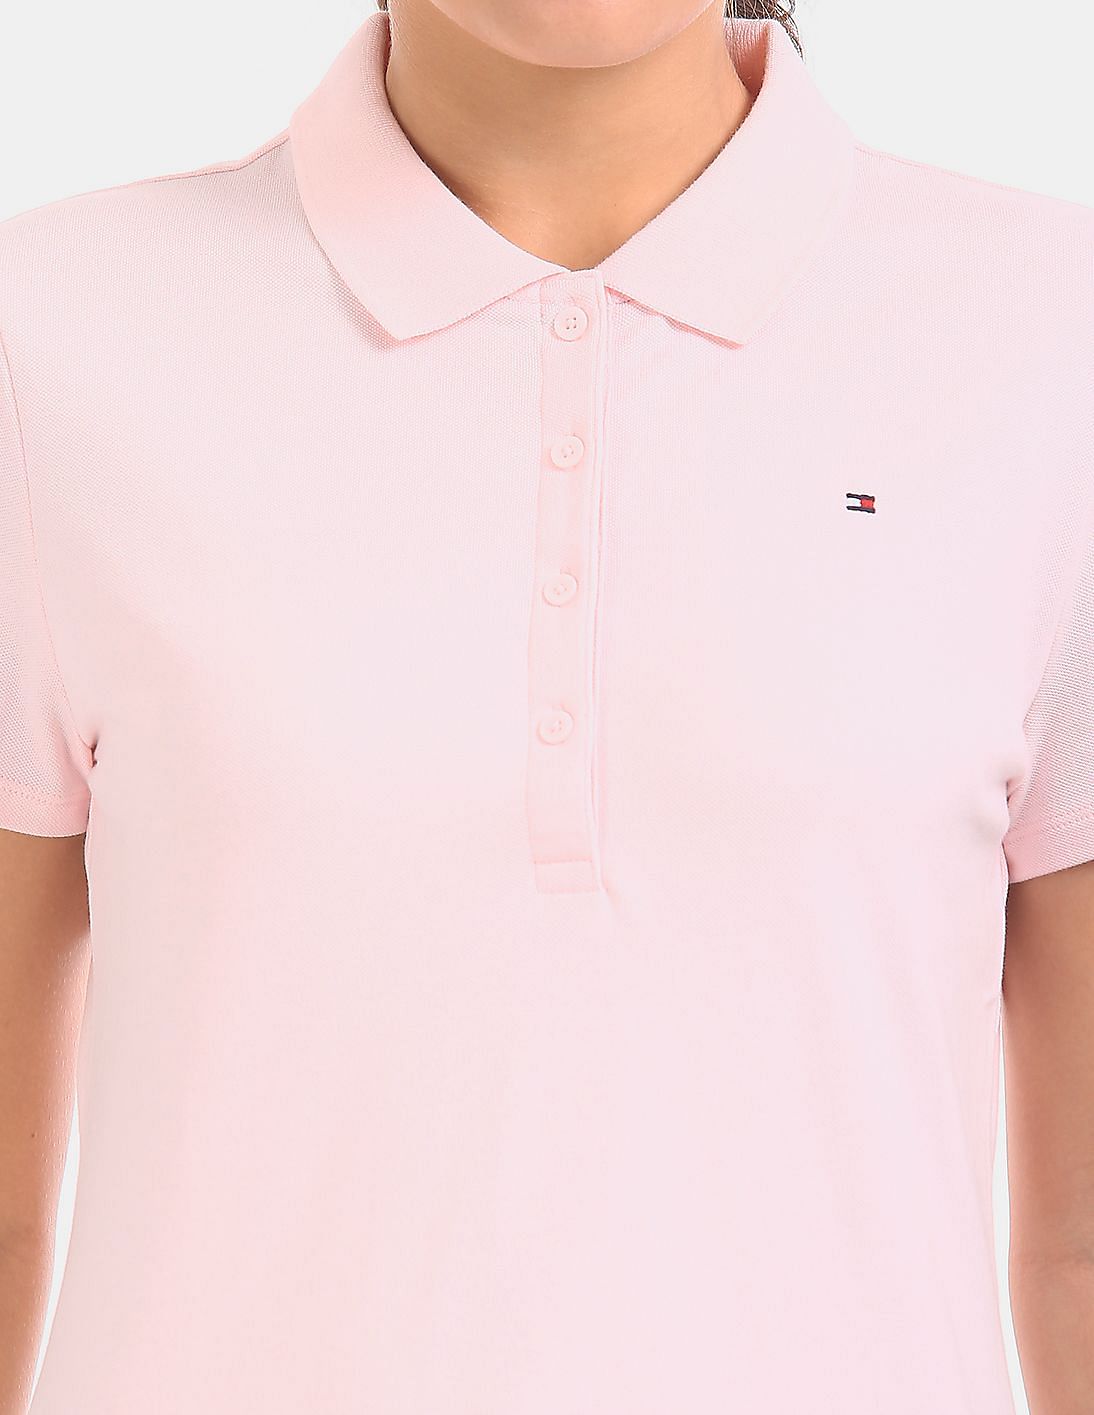 Buy Tommy Hilfiger Women Light Pink Solid Pique Polo Shirt